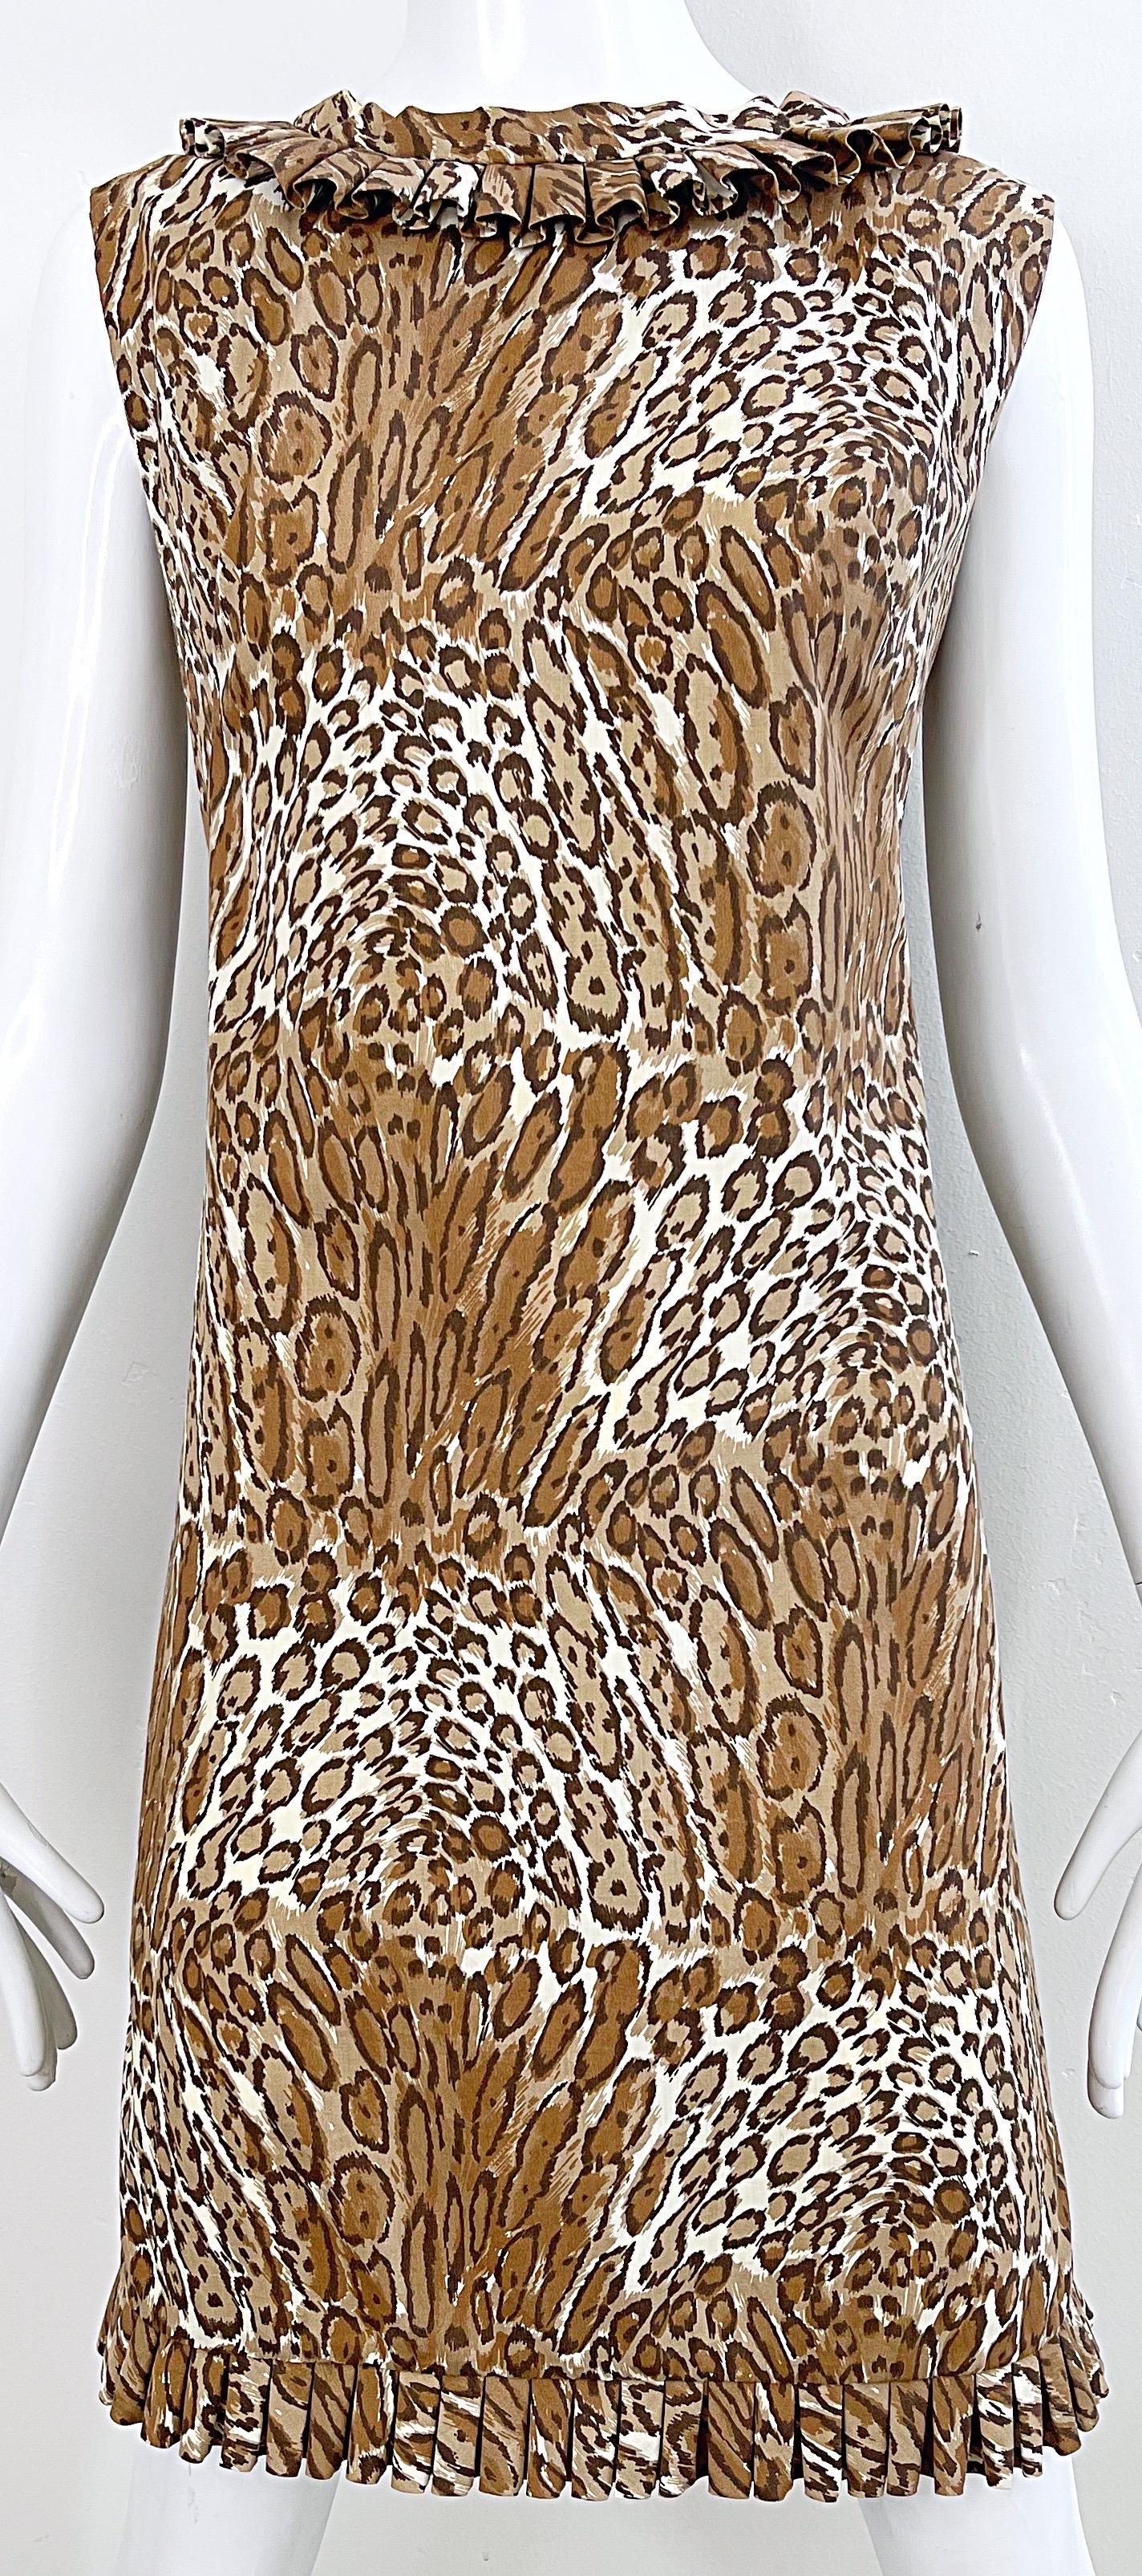 Women's 1960s Chic Leopard Cheetah Animal Abstract Print Cotton Vintage 60s Shift Dress